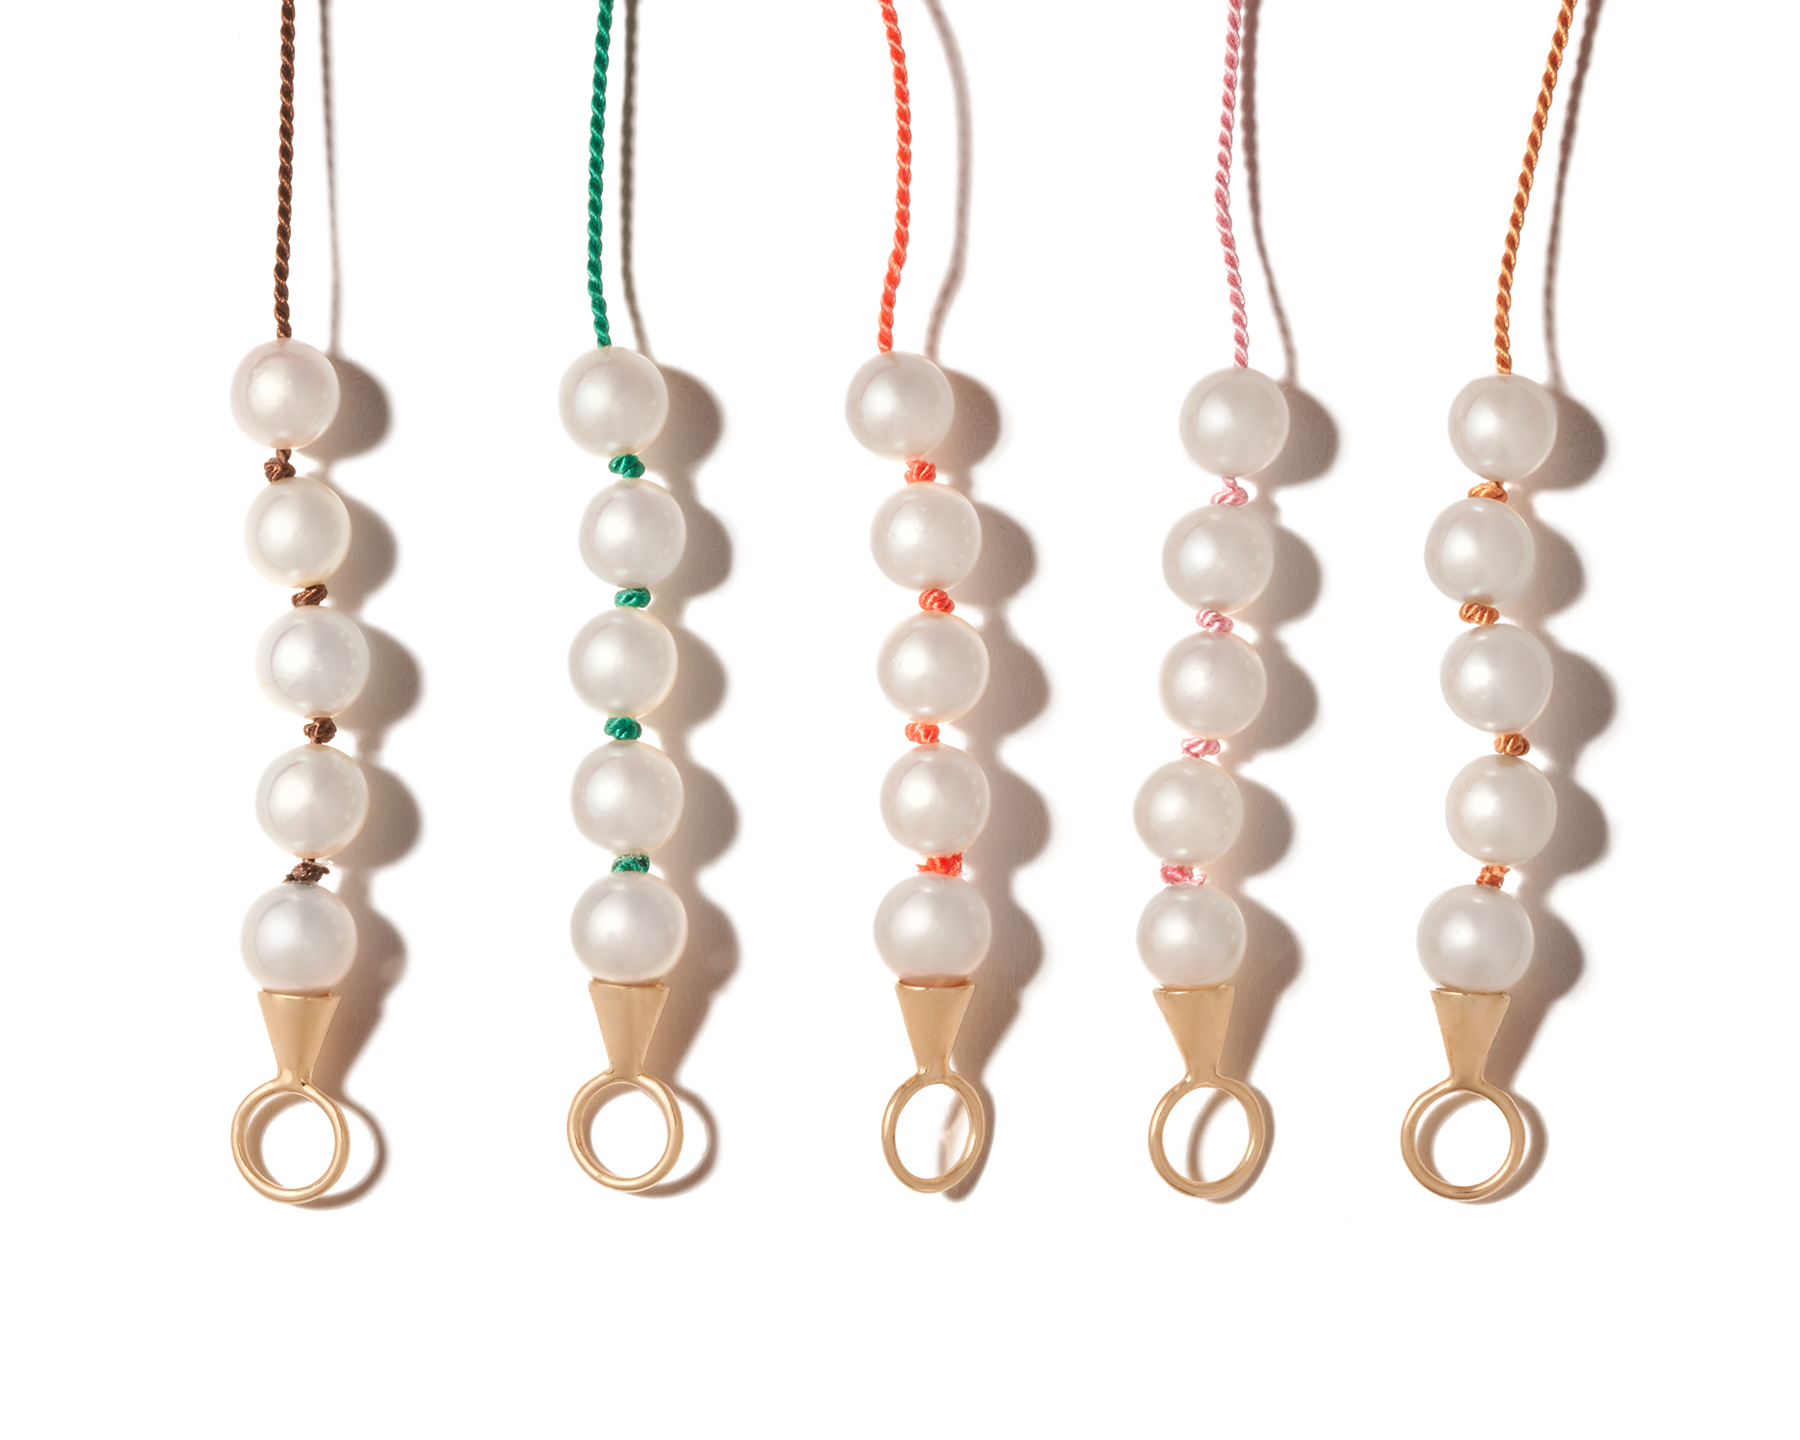 Close up of four custom made pearl necklaces with different color threads